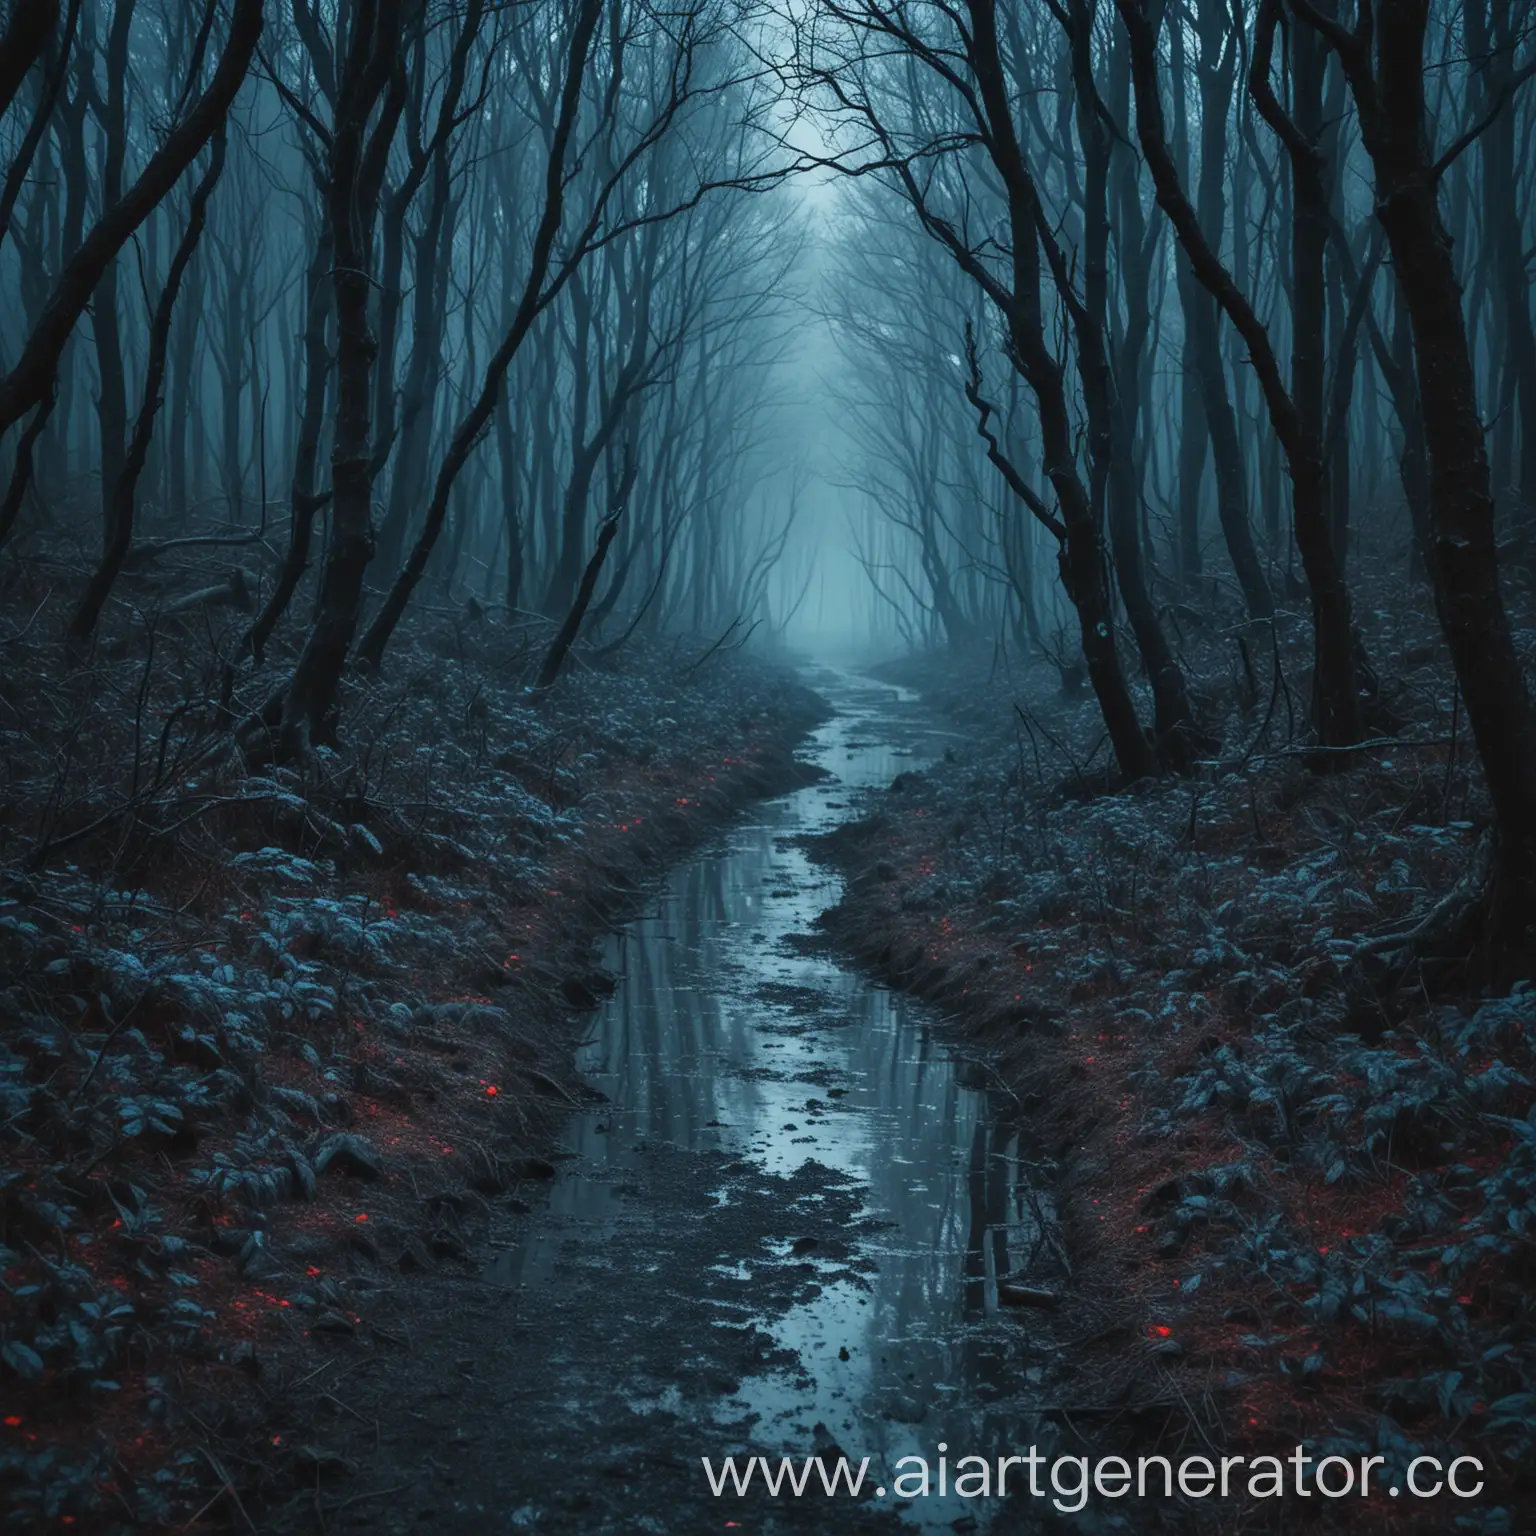 dark forest in blue tones sits in the middle of a path while it rains blood